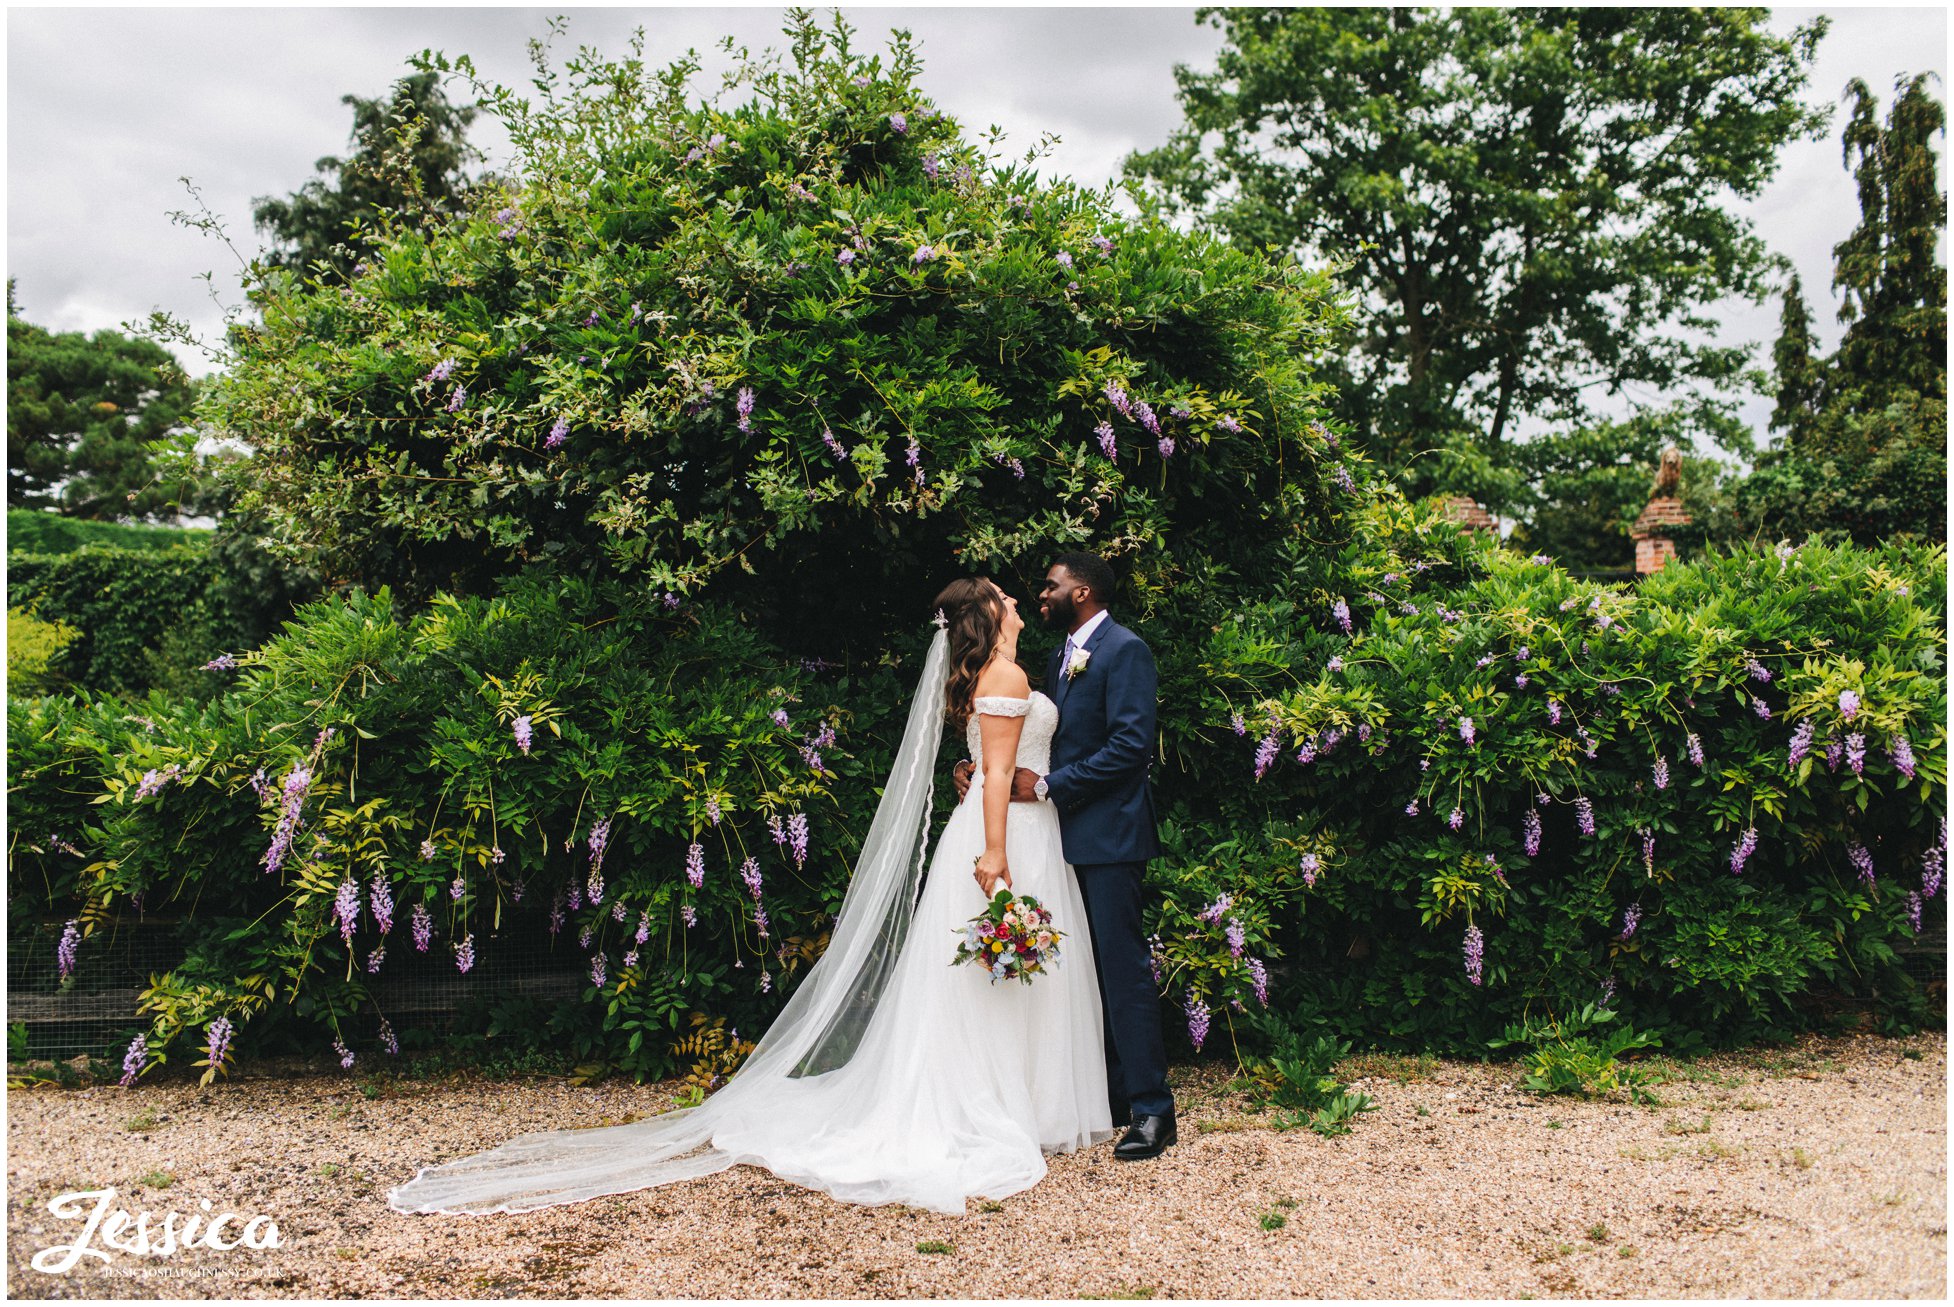 the couple kiss in front of wisteria  